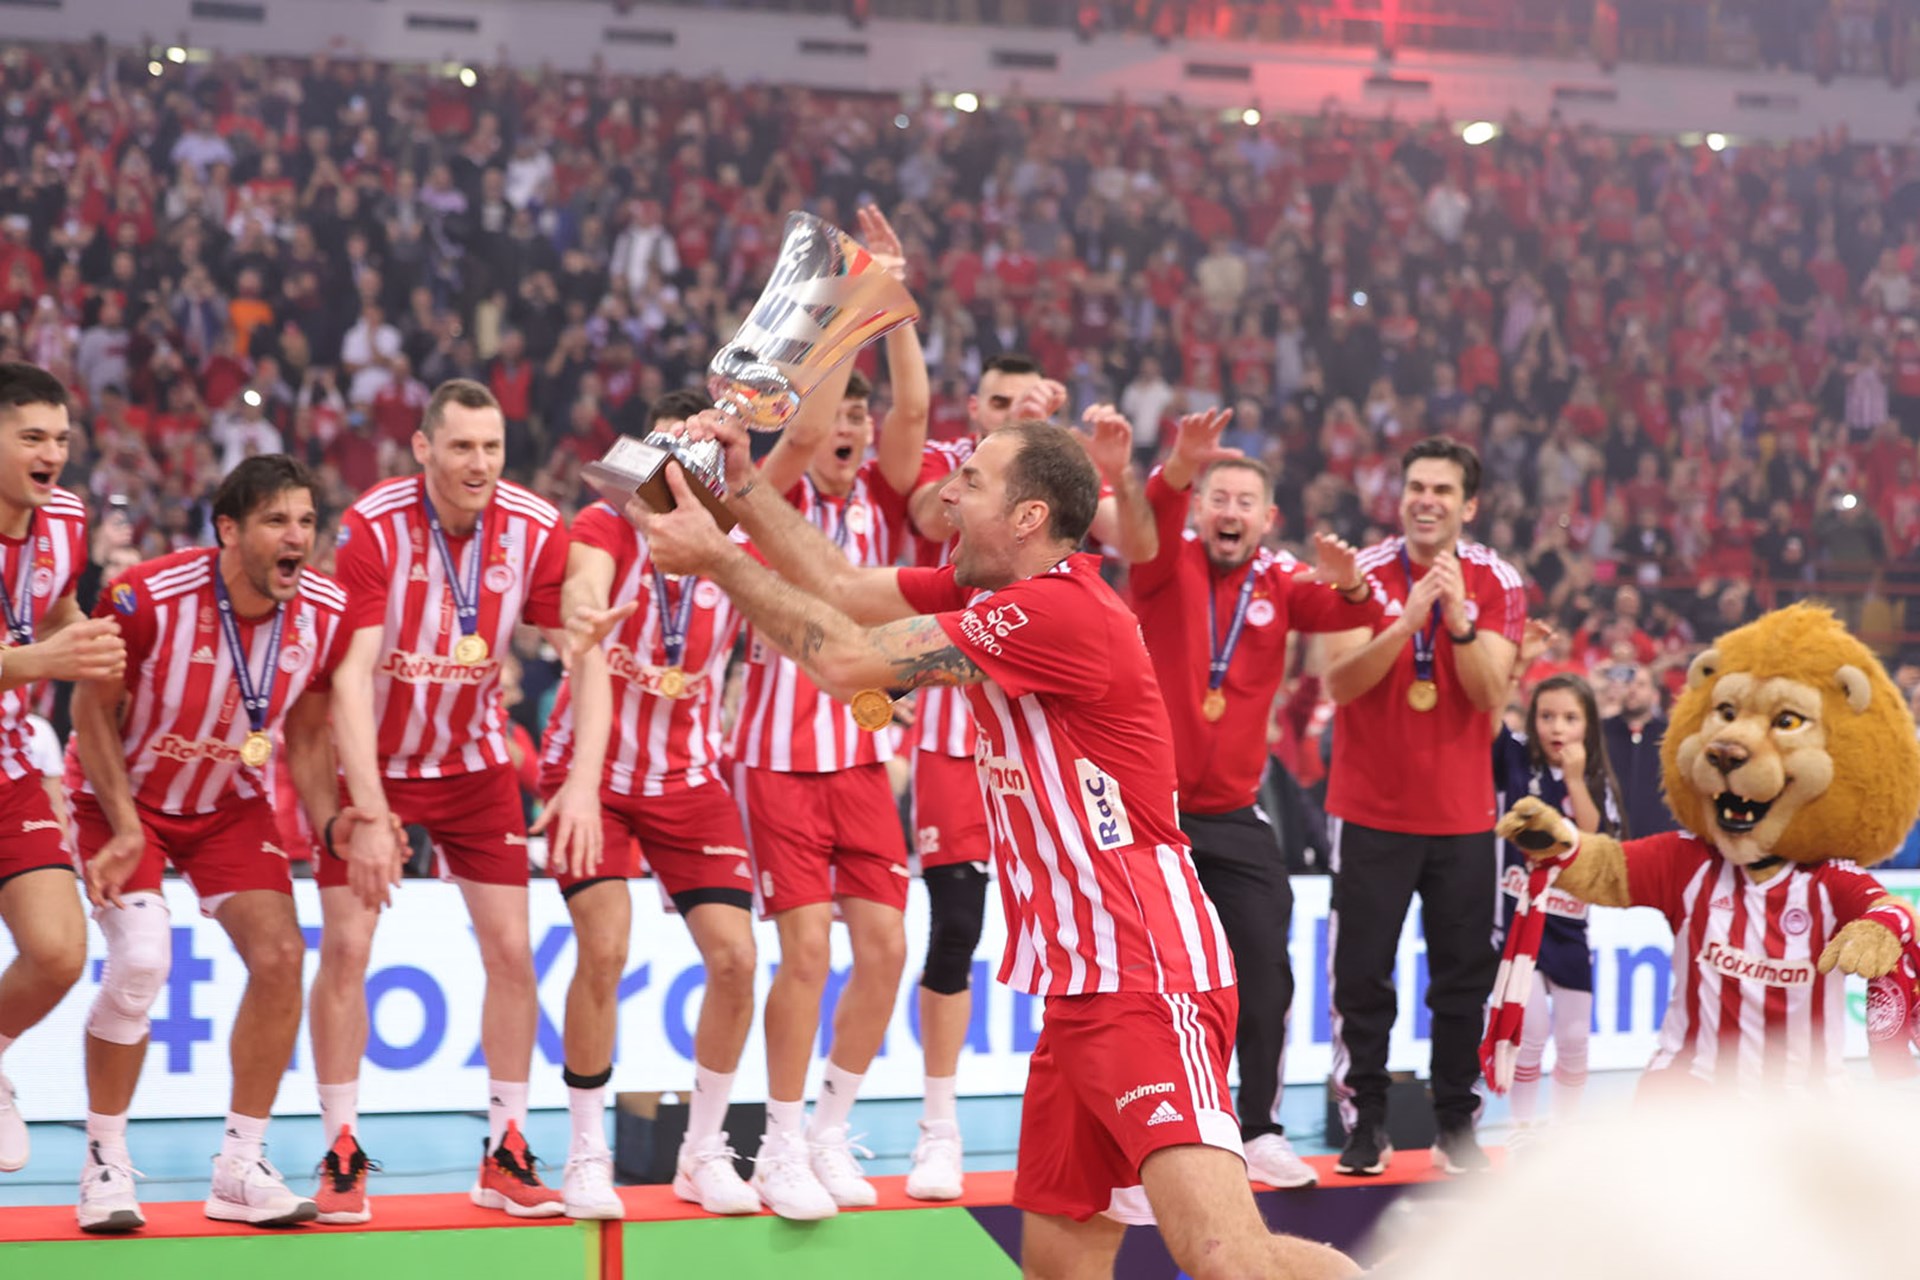 Olympiacos PIRAEUS are the CEV Challenge Cup champions